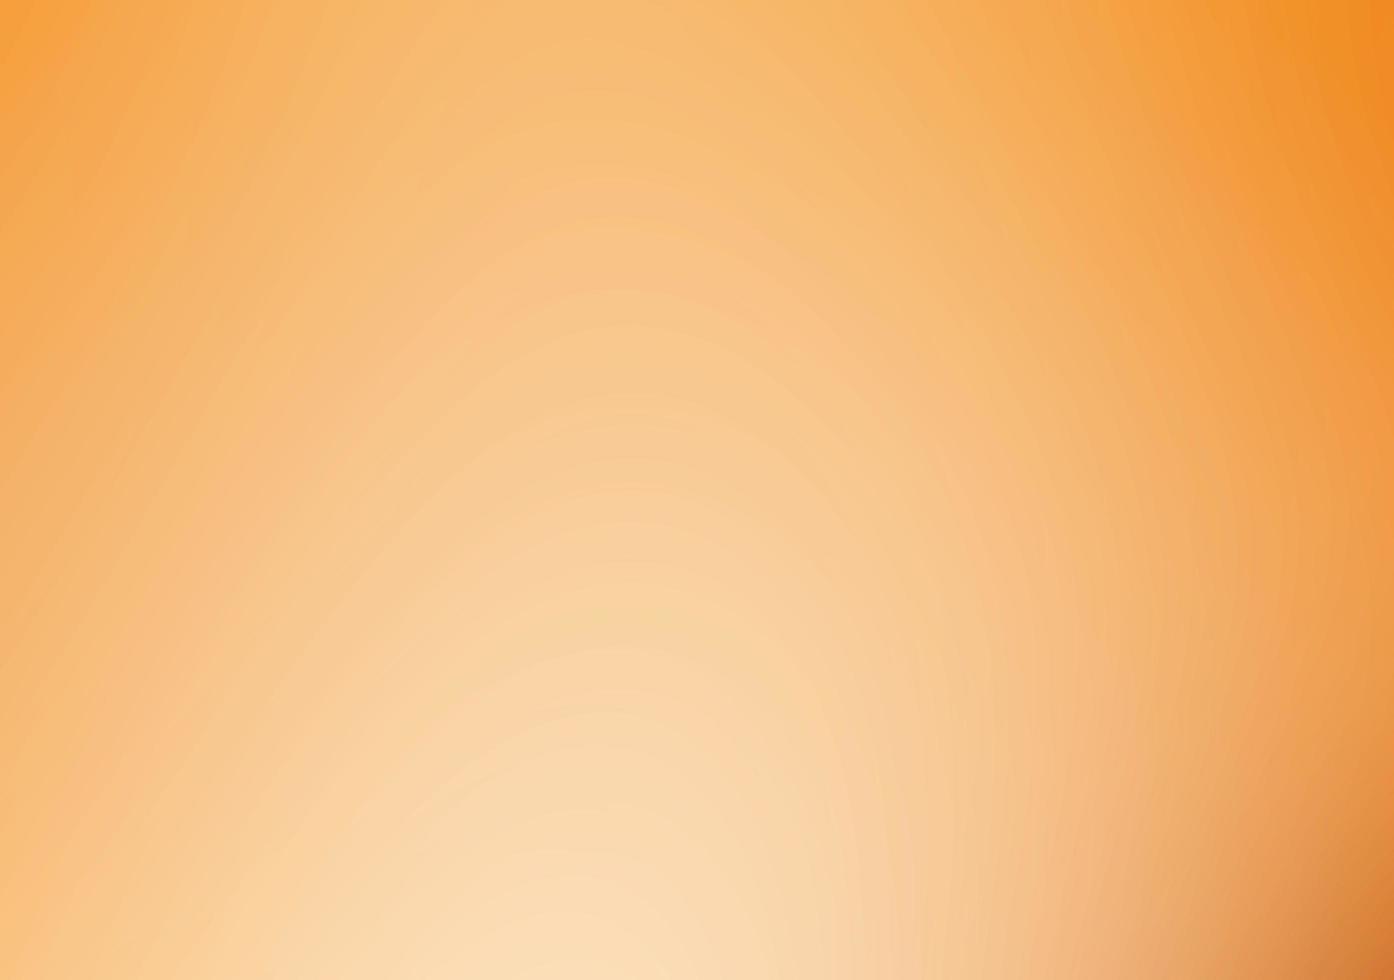 Orange color blur effect abstract background photo